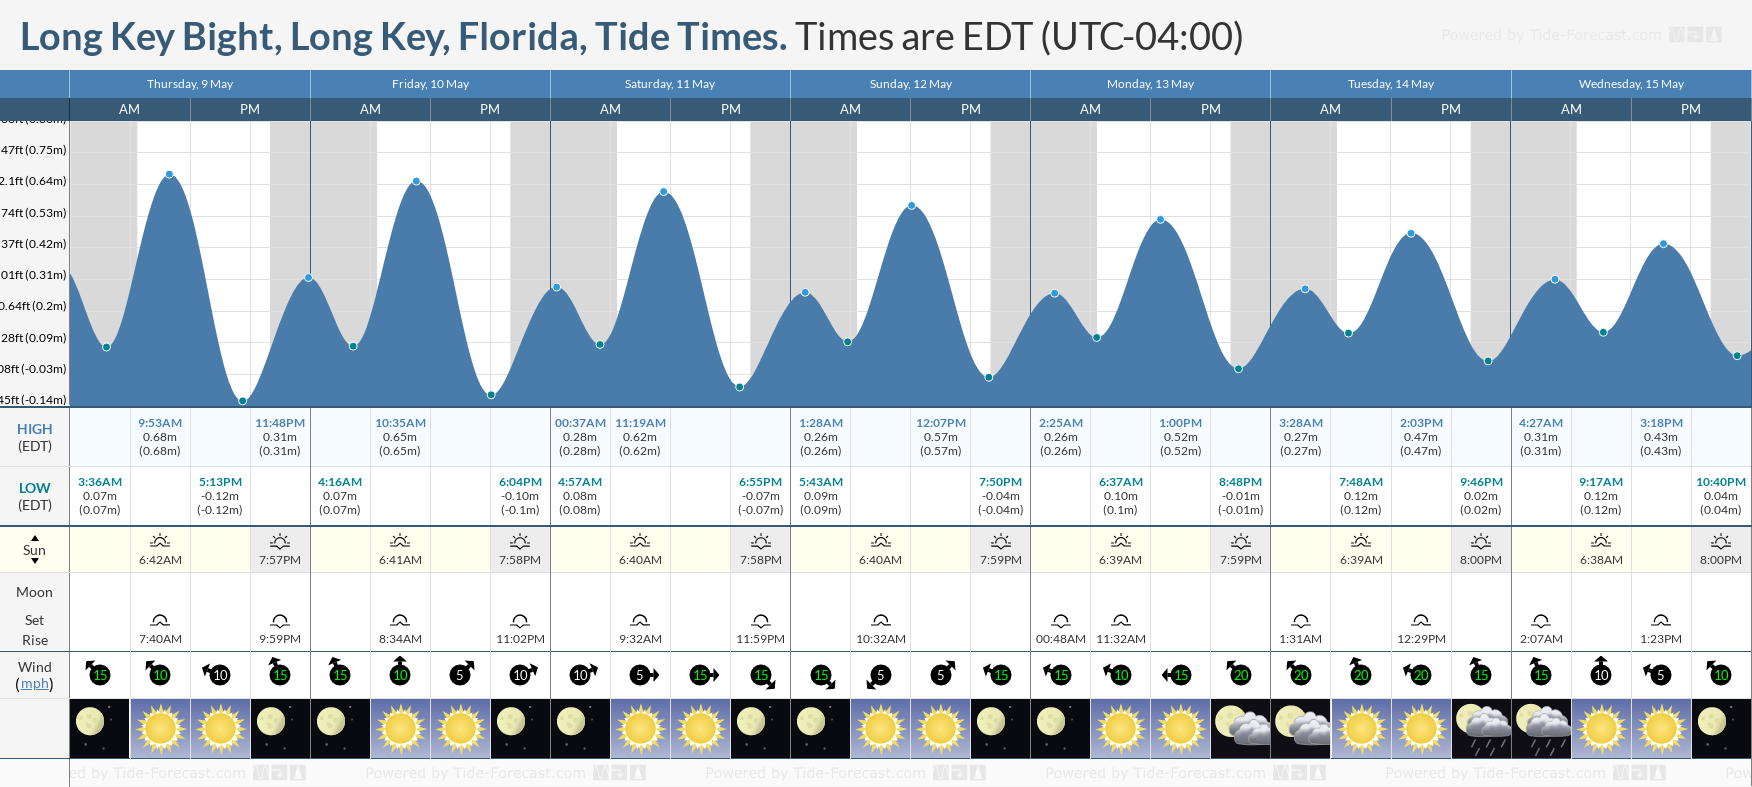 Long Key Bight, Long Key, Florida Tide Chart including high and low tide times for the next 7 days